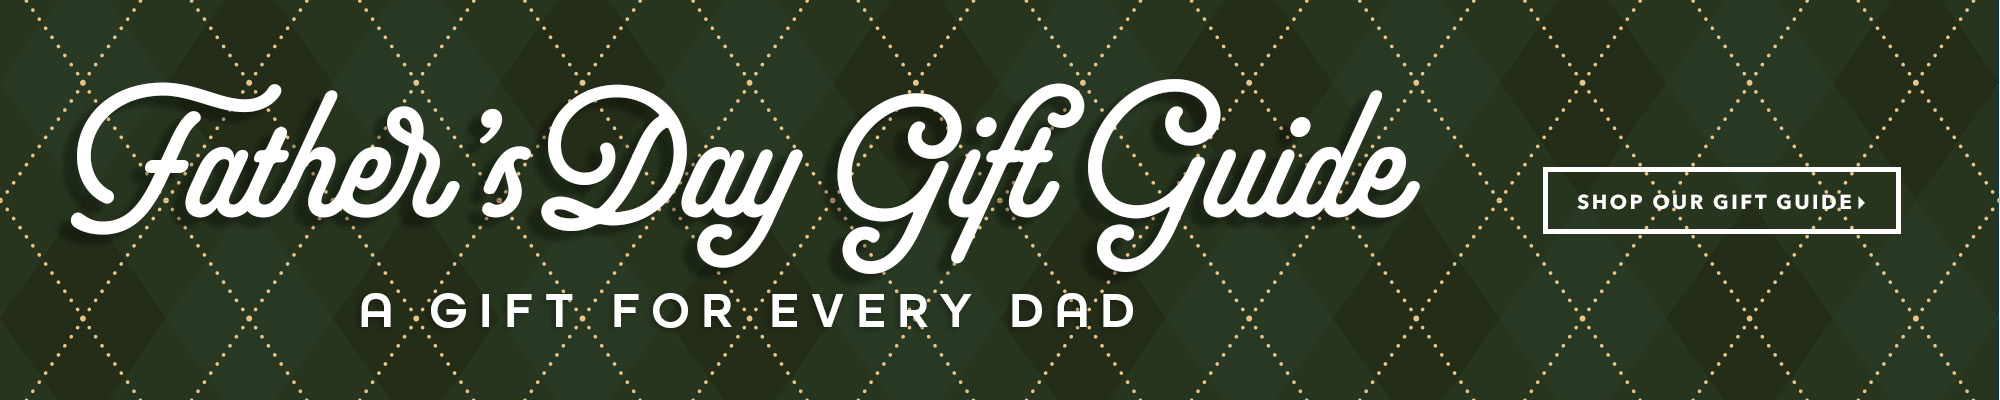 Father's Day Sale - Save Big On The Perfect Gift For Dad